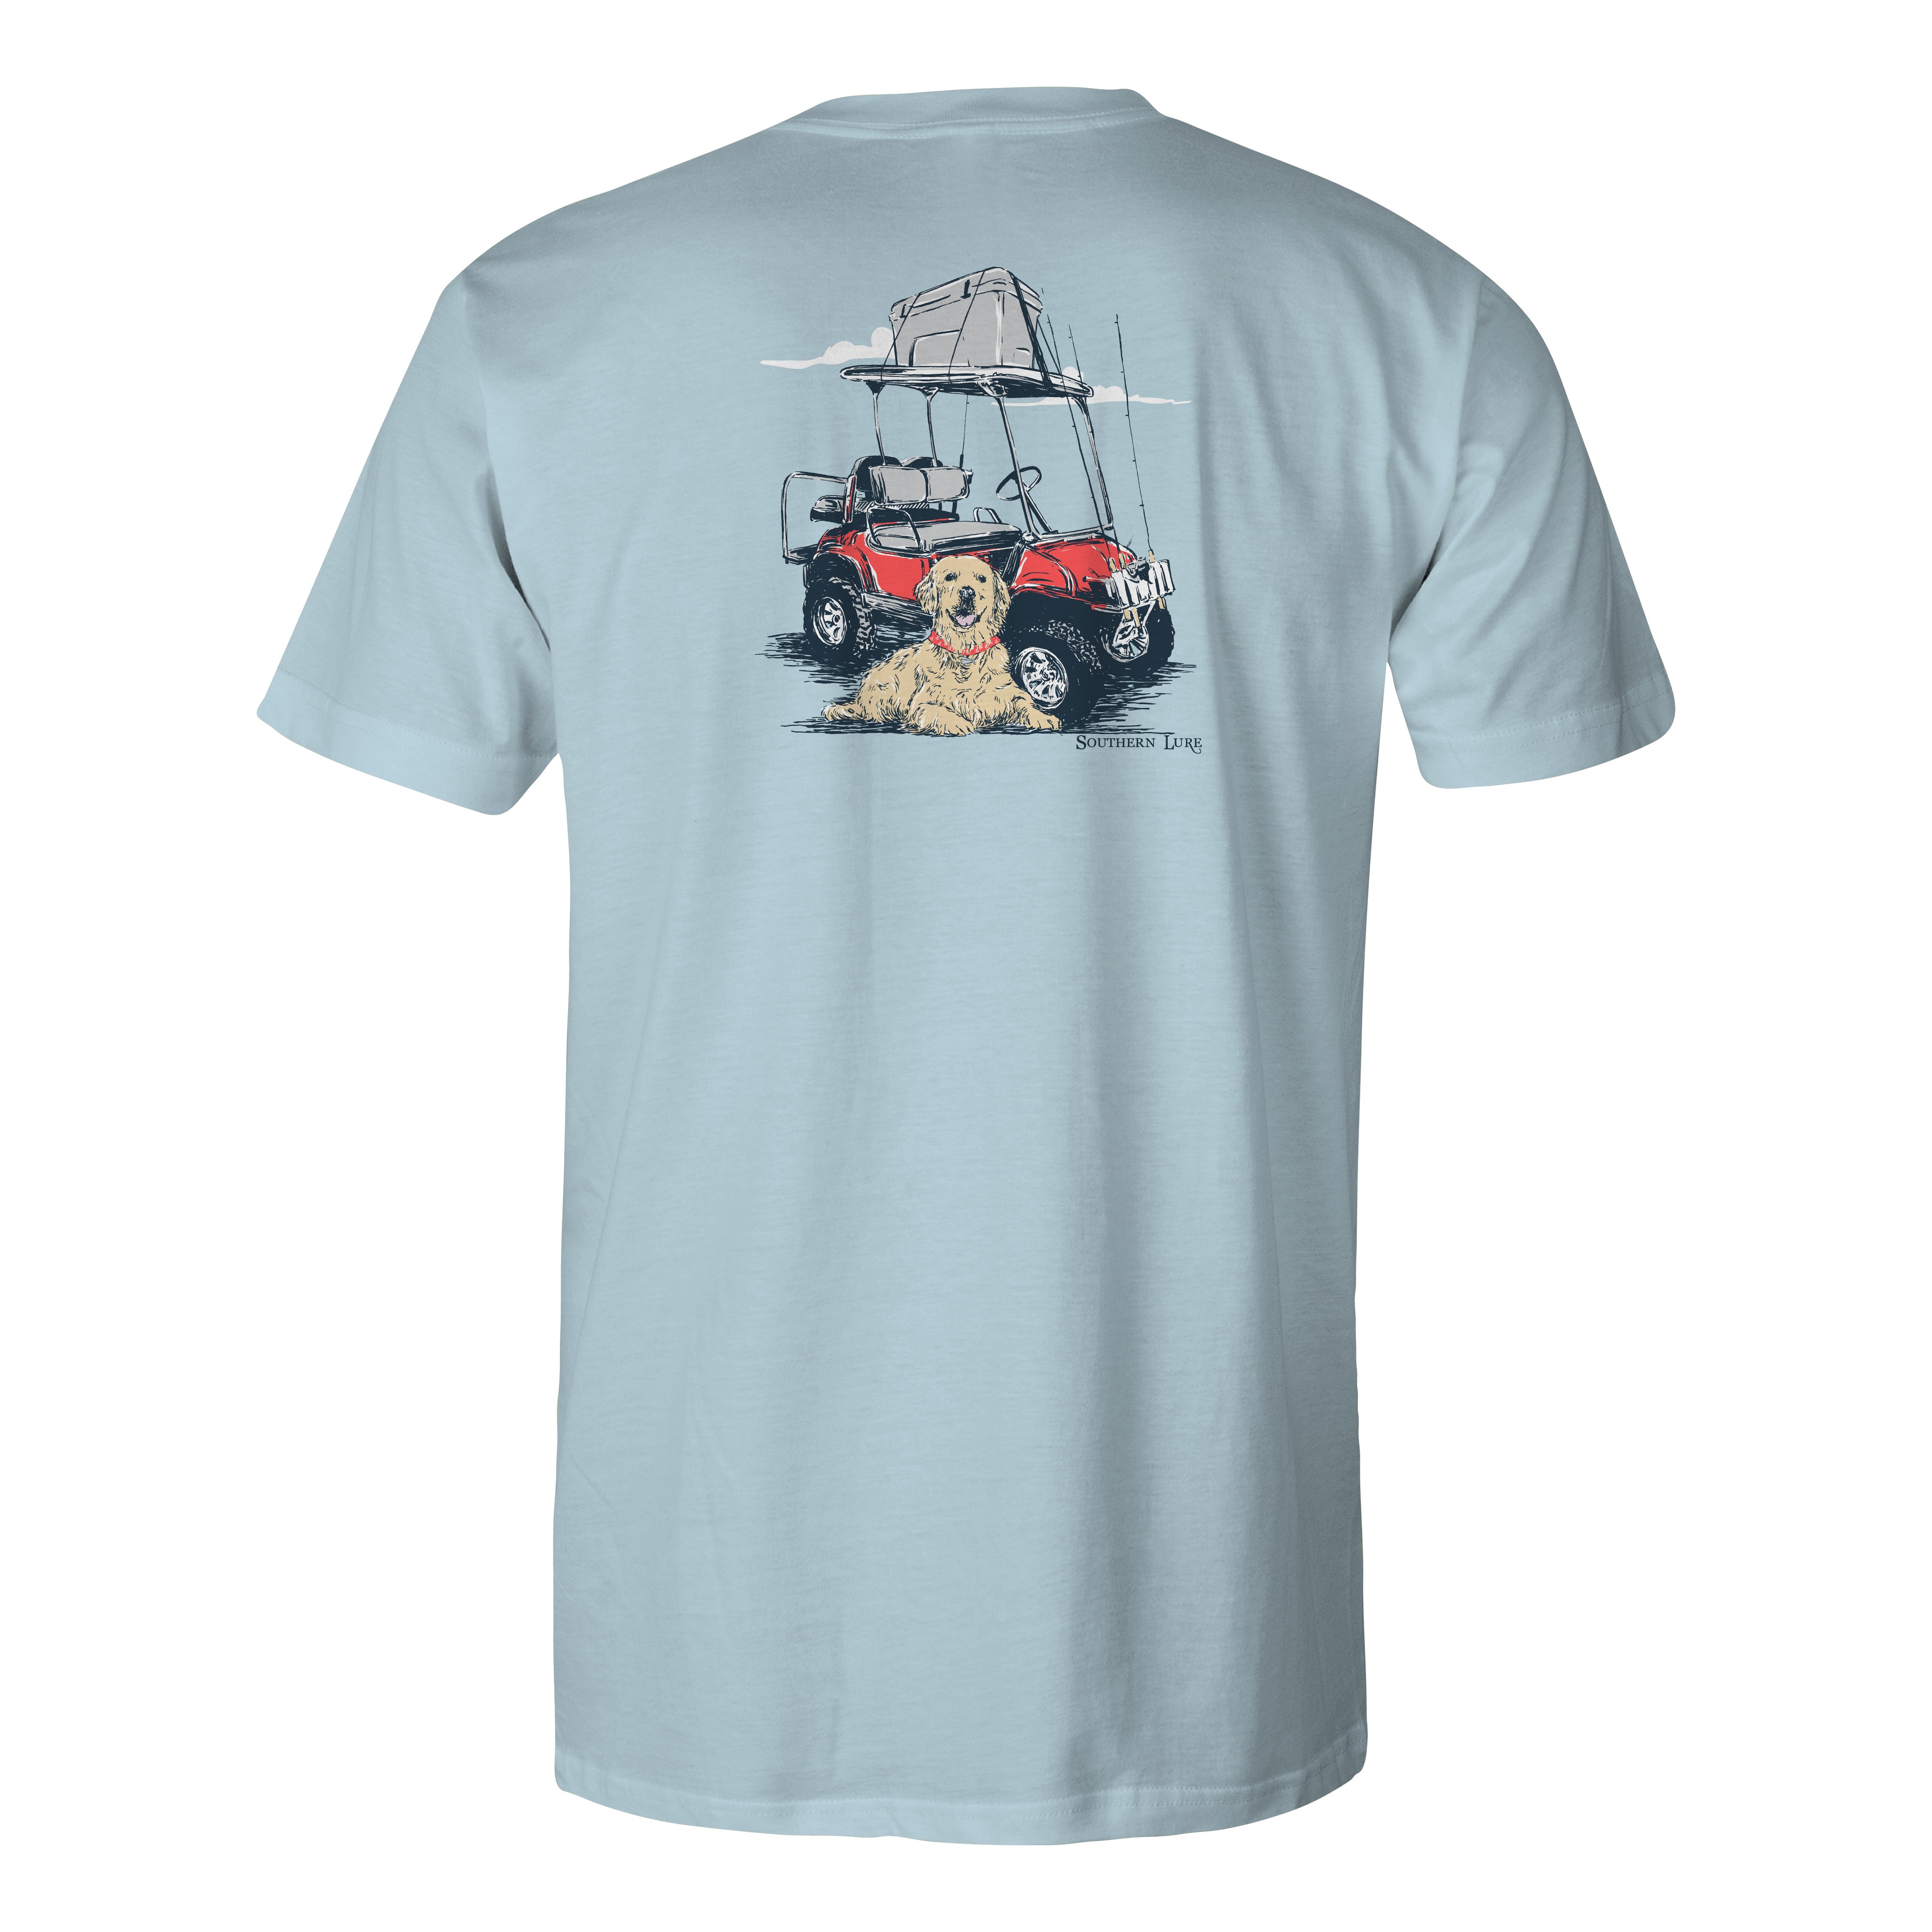 Boy's Youth & Toddler Cotton Short Sleeve Tee Fishing